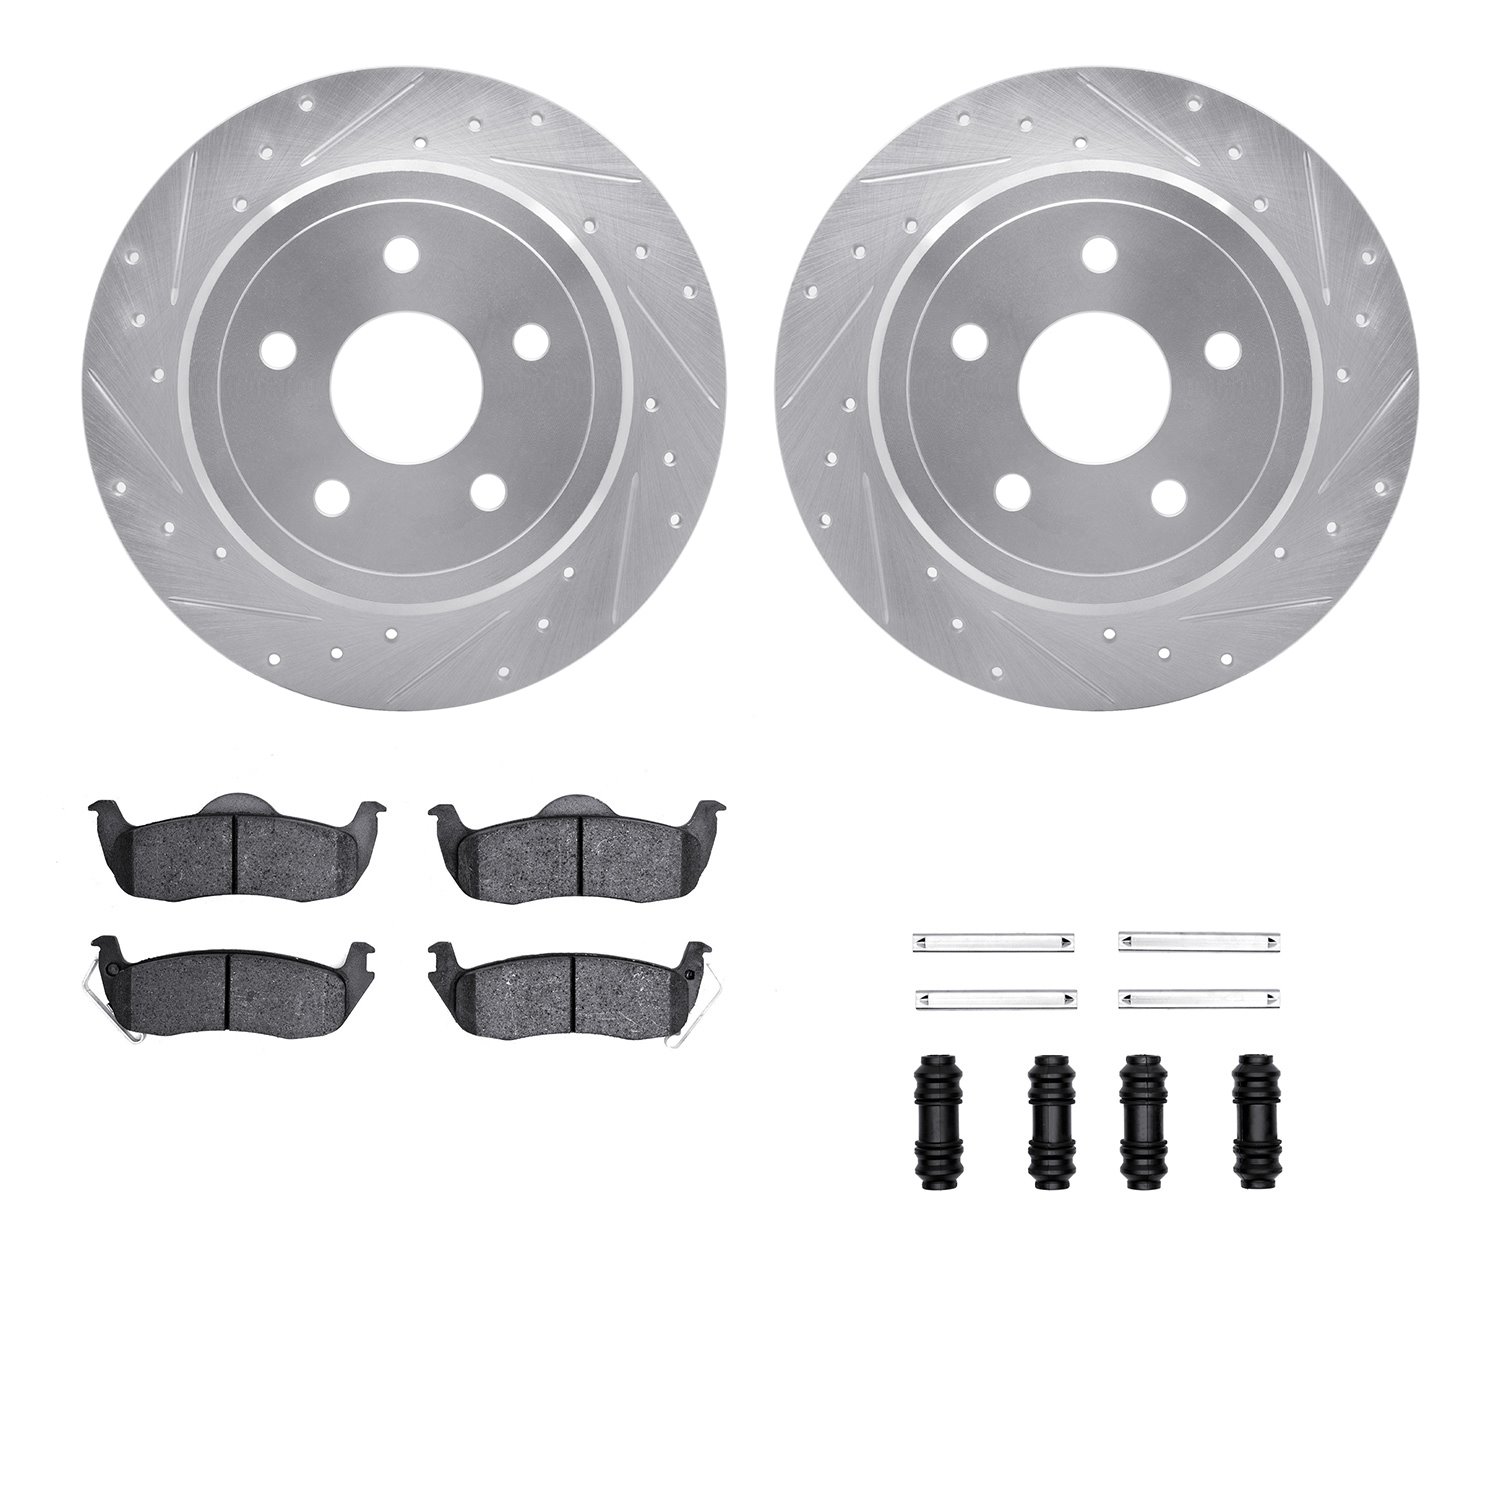 7412-42002 Drilled/Slotted Brake Rotors with Ultimate-Duty Brake Pads Kit & Hardware [Silver], 2005-2010 Mopar, Position: Rear